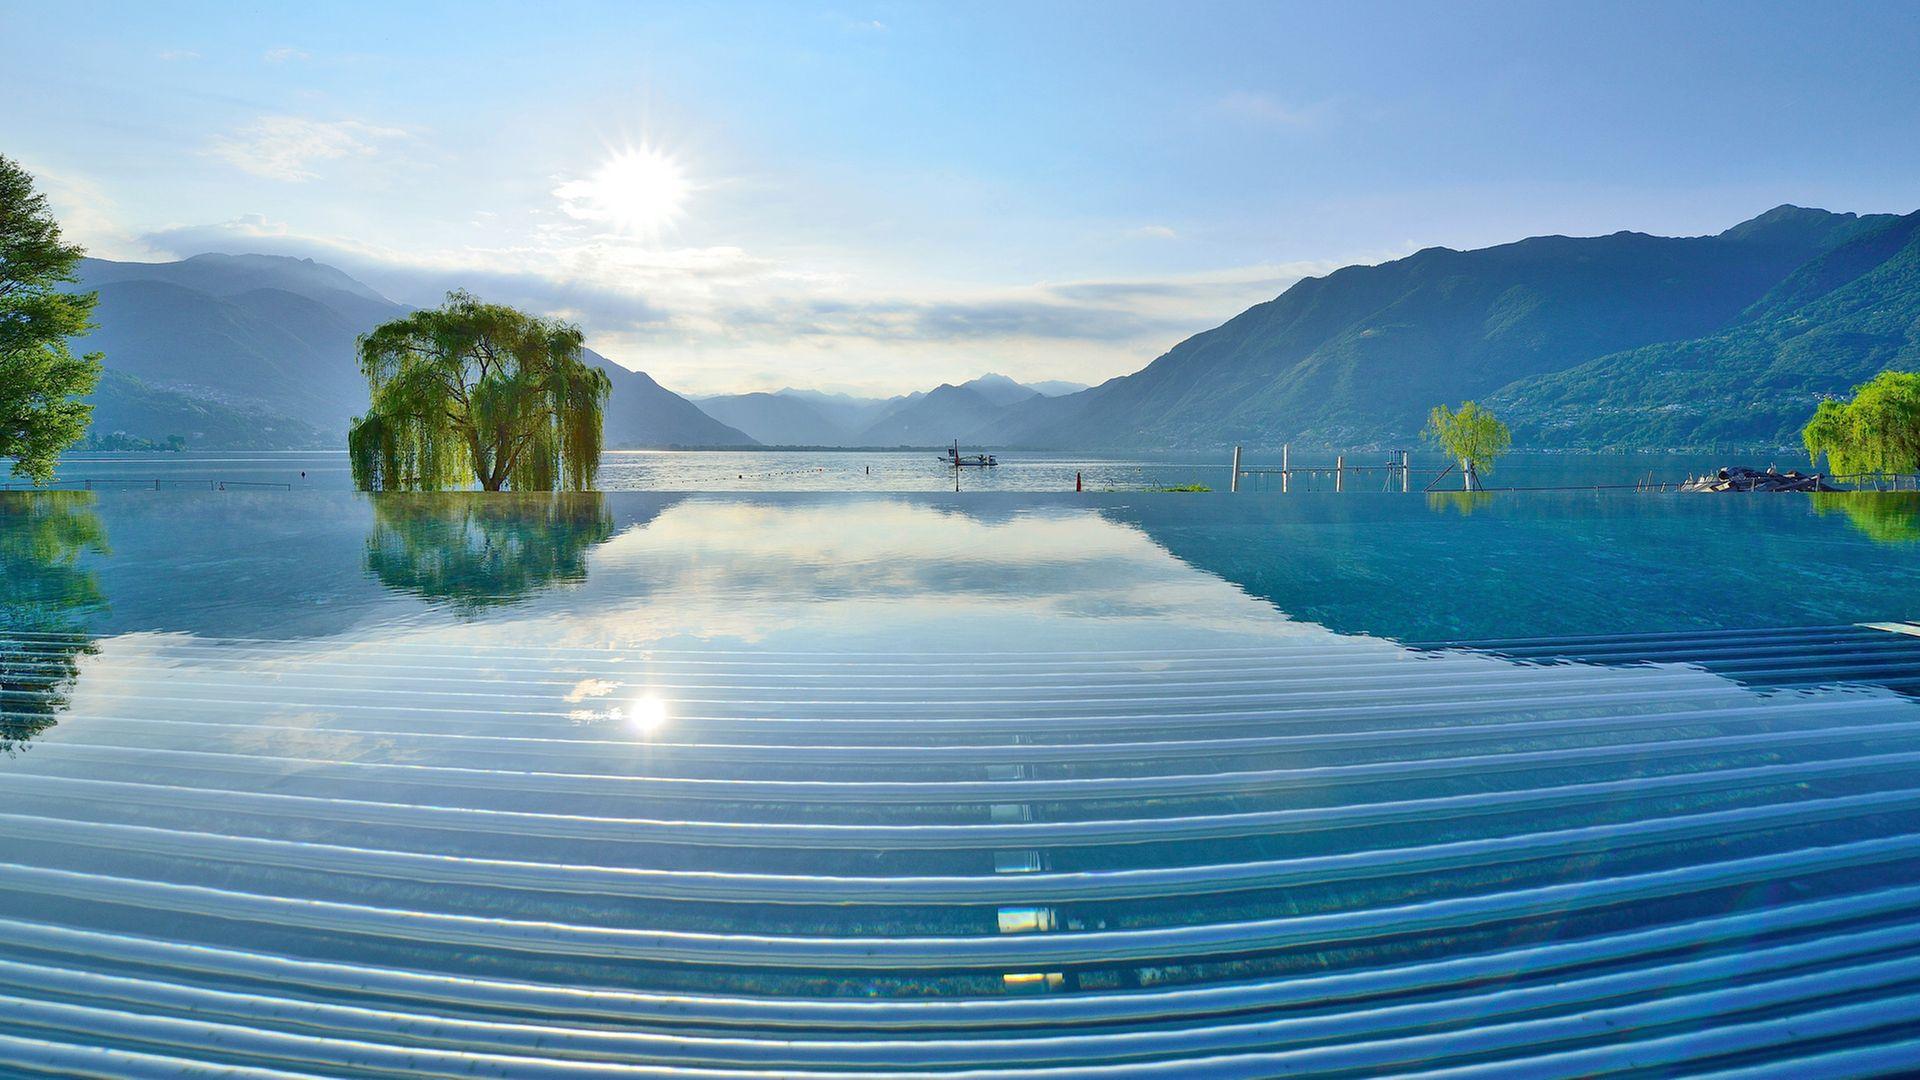 Wellness & Well Being At Lago Maggiore